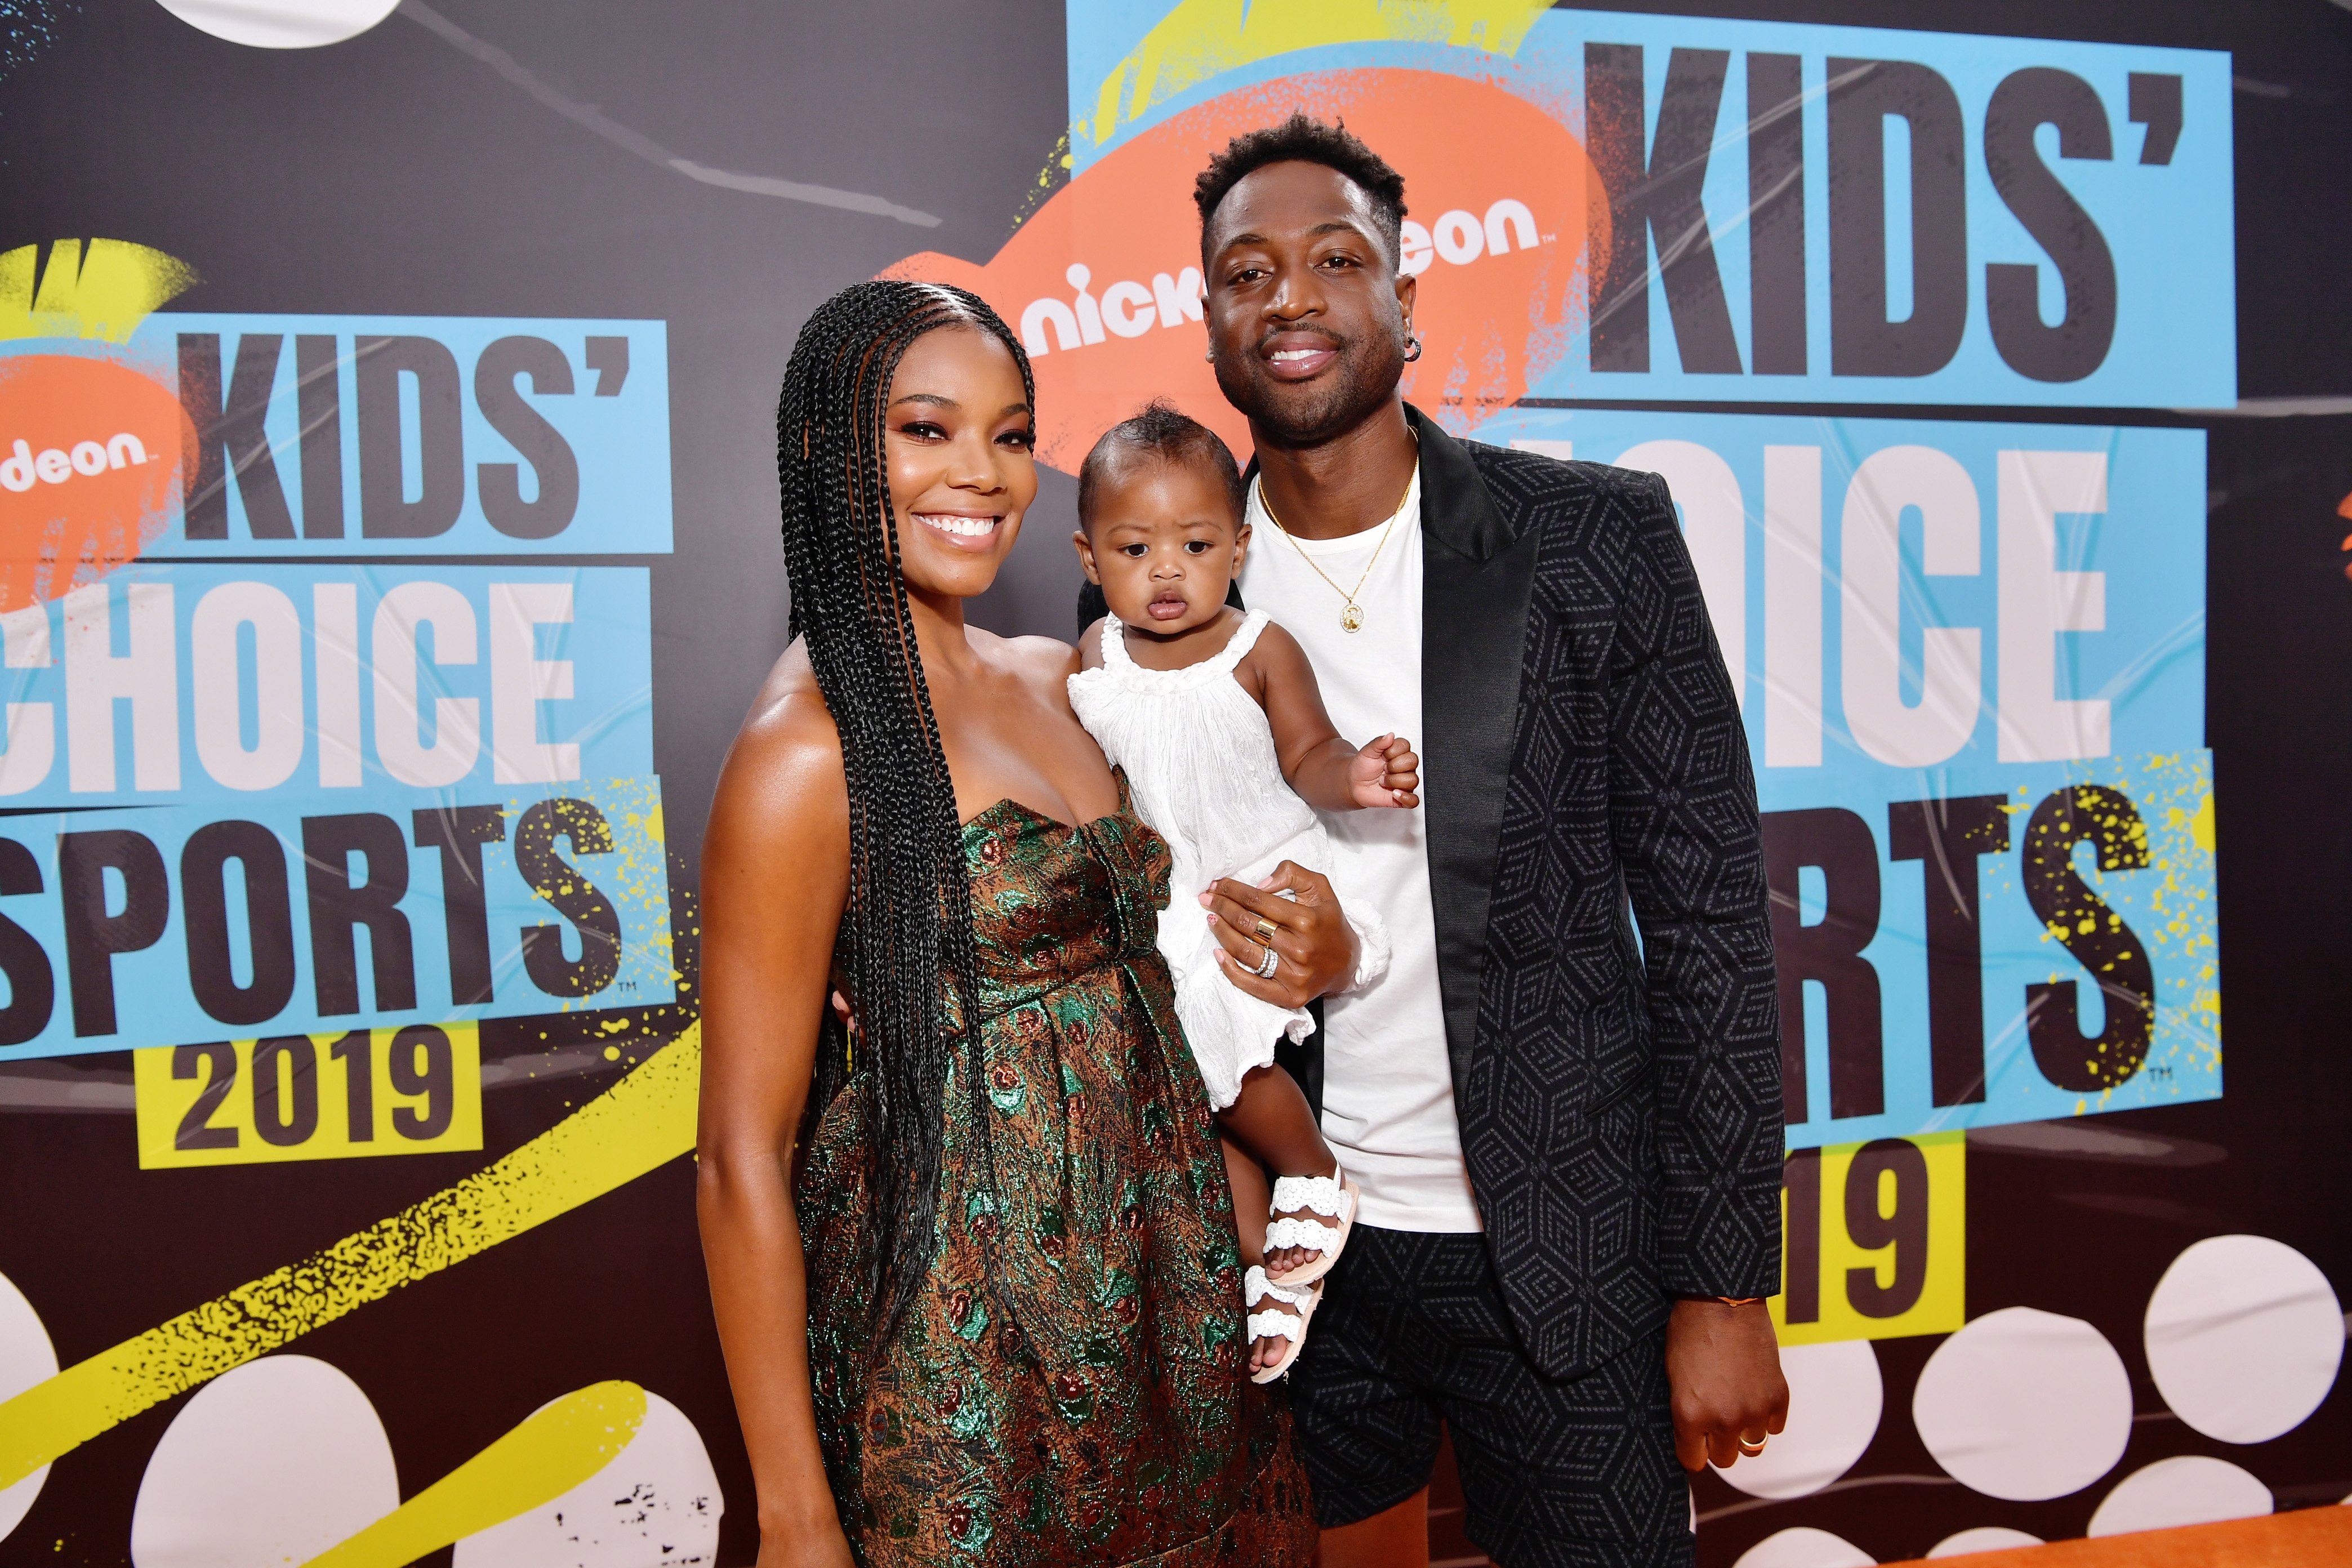 Gabrielle Union and Dwyane Wade with their daughter Kaavia James attending Nickelodeon Kids' Choice Sports 2019 on July 11, 2019 | Photo: Getty Images